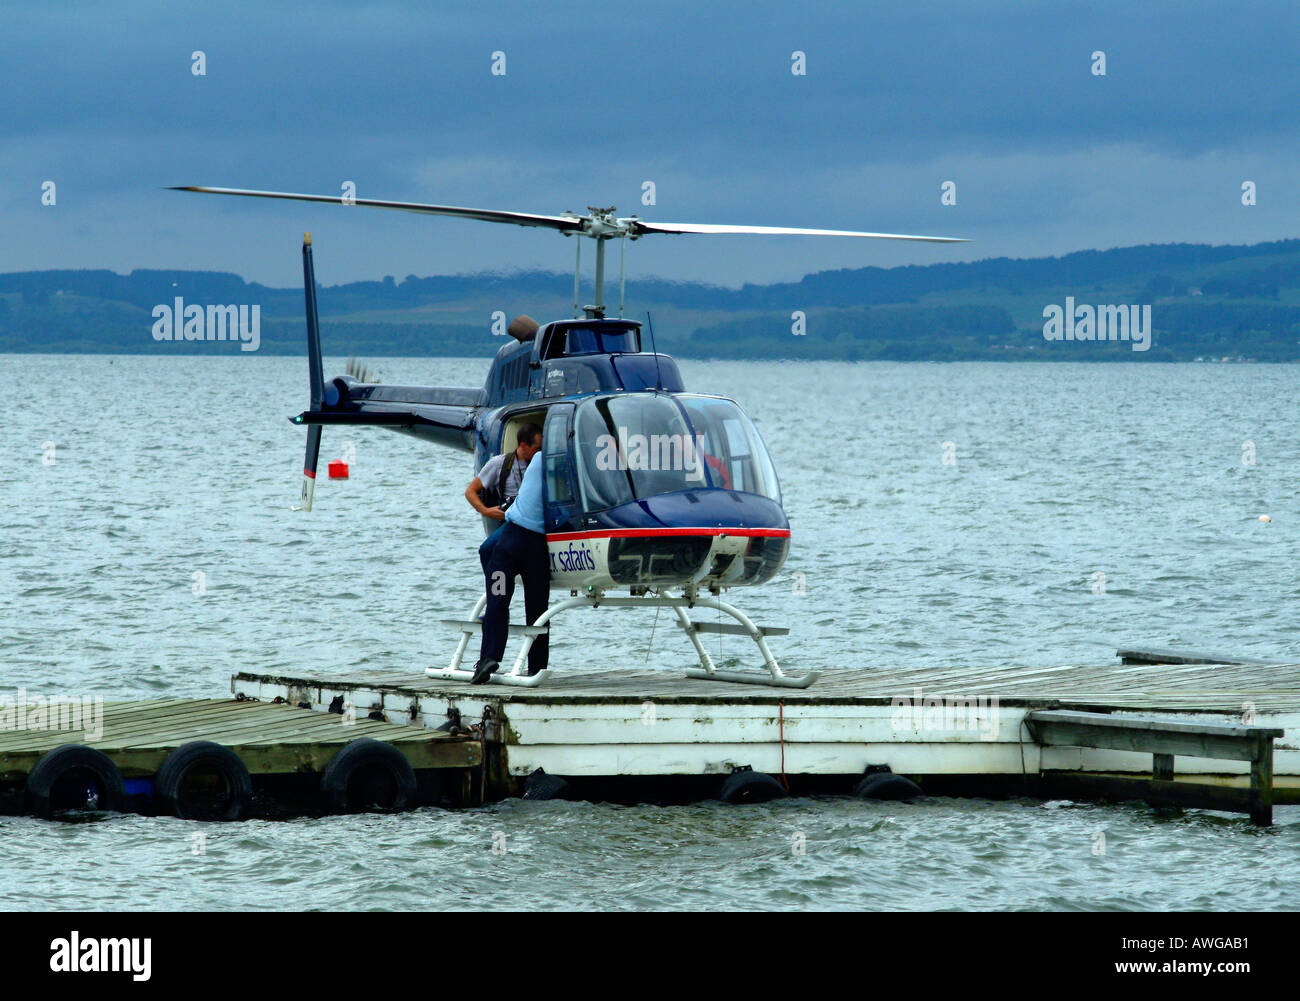 Helicopter and pilot on the ground Lake Taupo North Island New Zealand Stock Photo